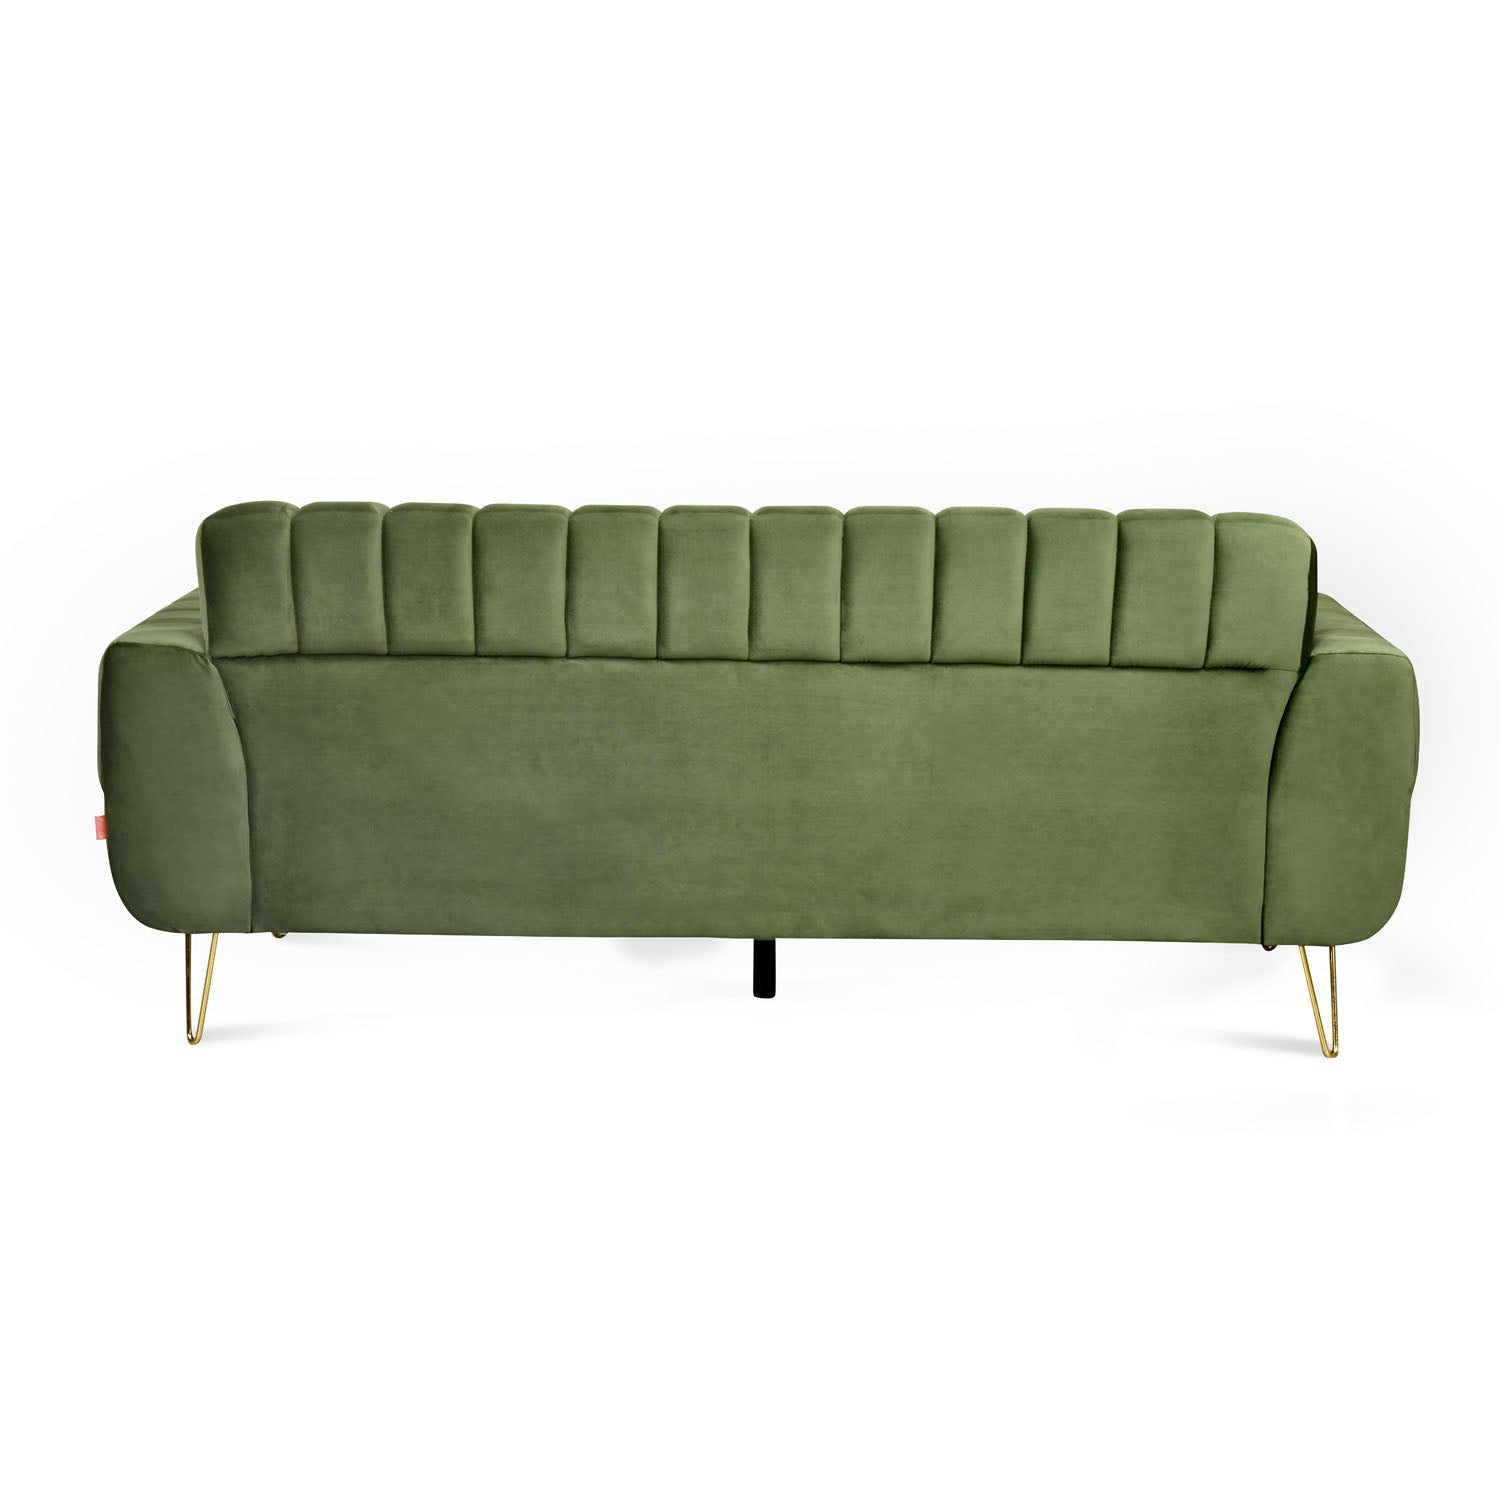 Buy Somerville 3 Seater Sofa (Olive Green)Online- At Home by Nilkamal ...